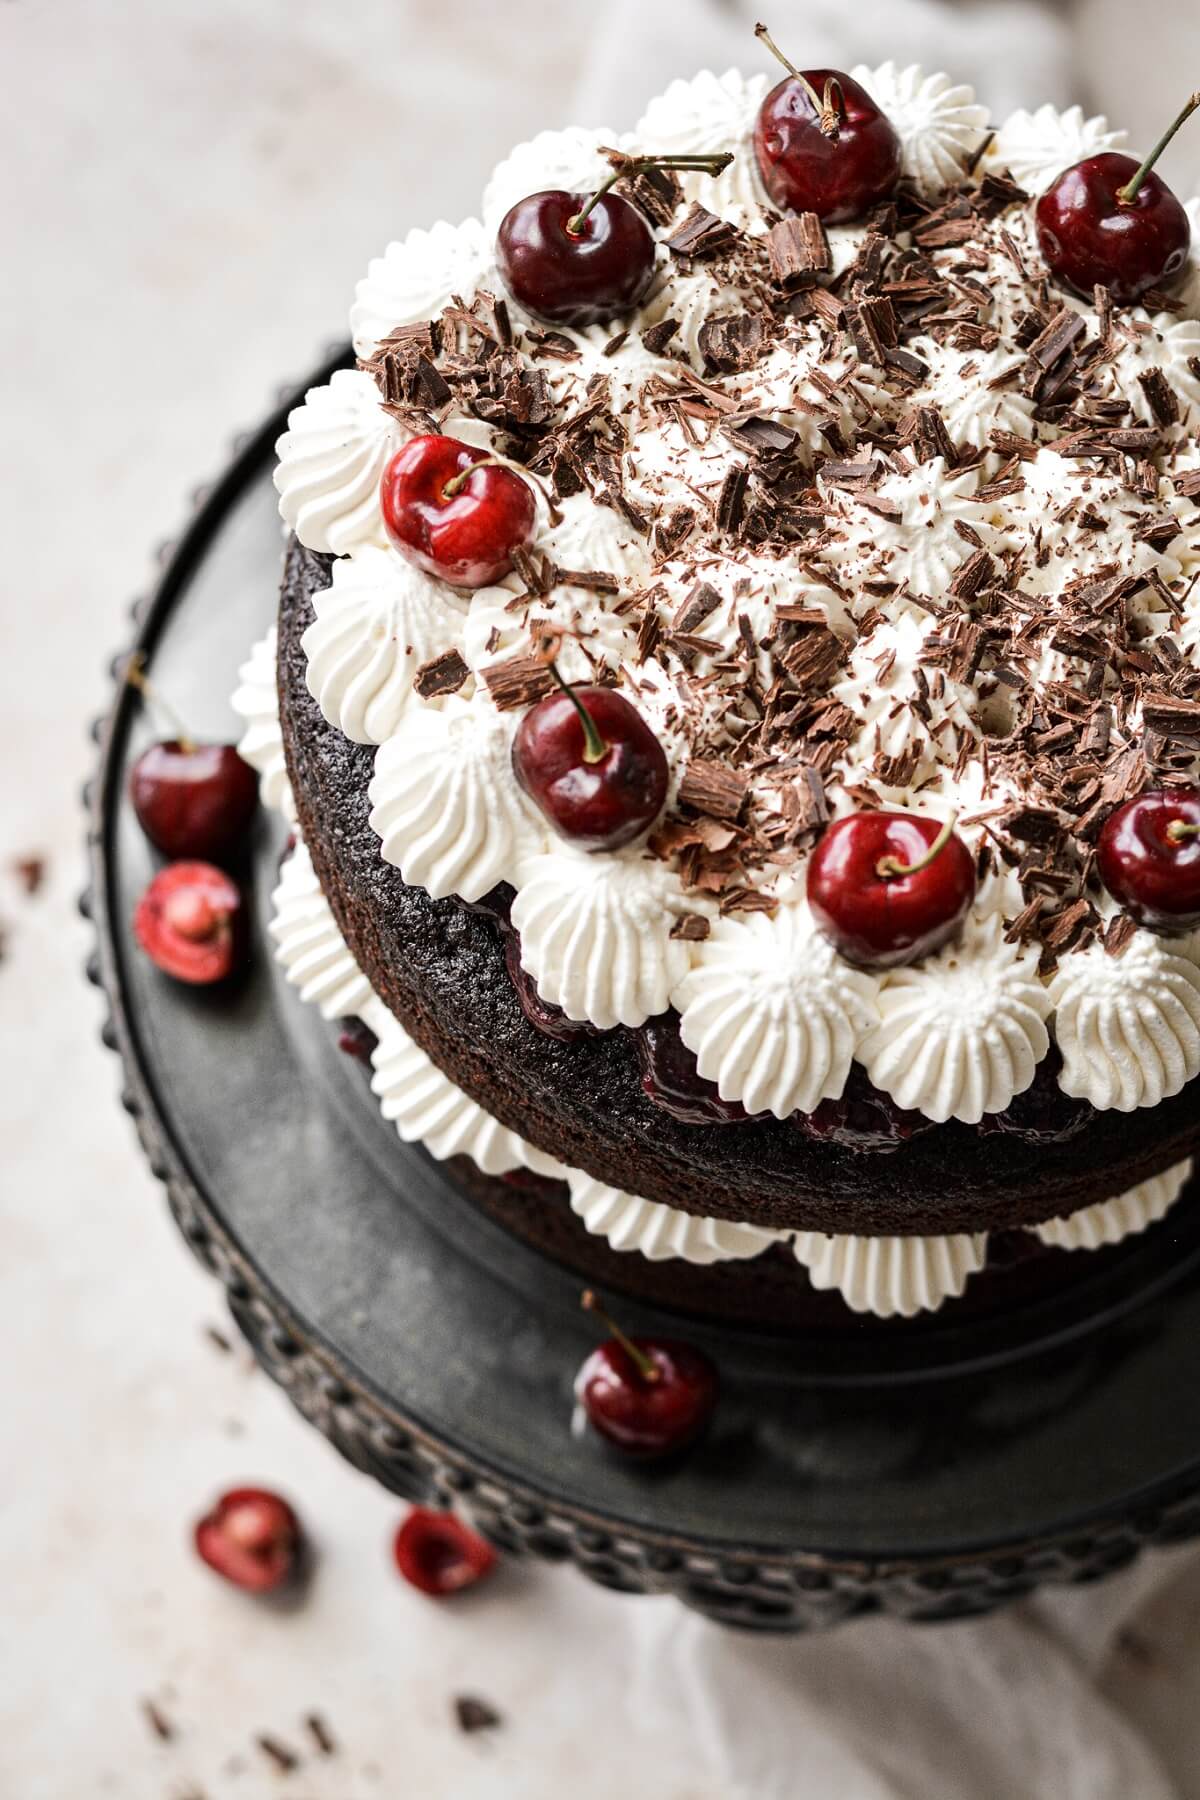 How to Make this Rich & Decadent Black Forest Cake - XO, Katie Rosario-sgquangbinhtourist.com.vn